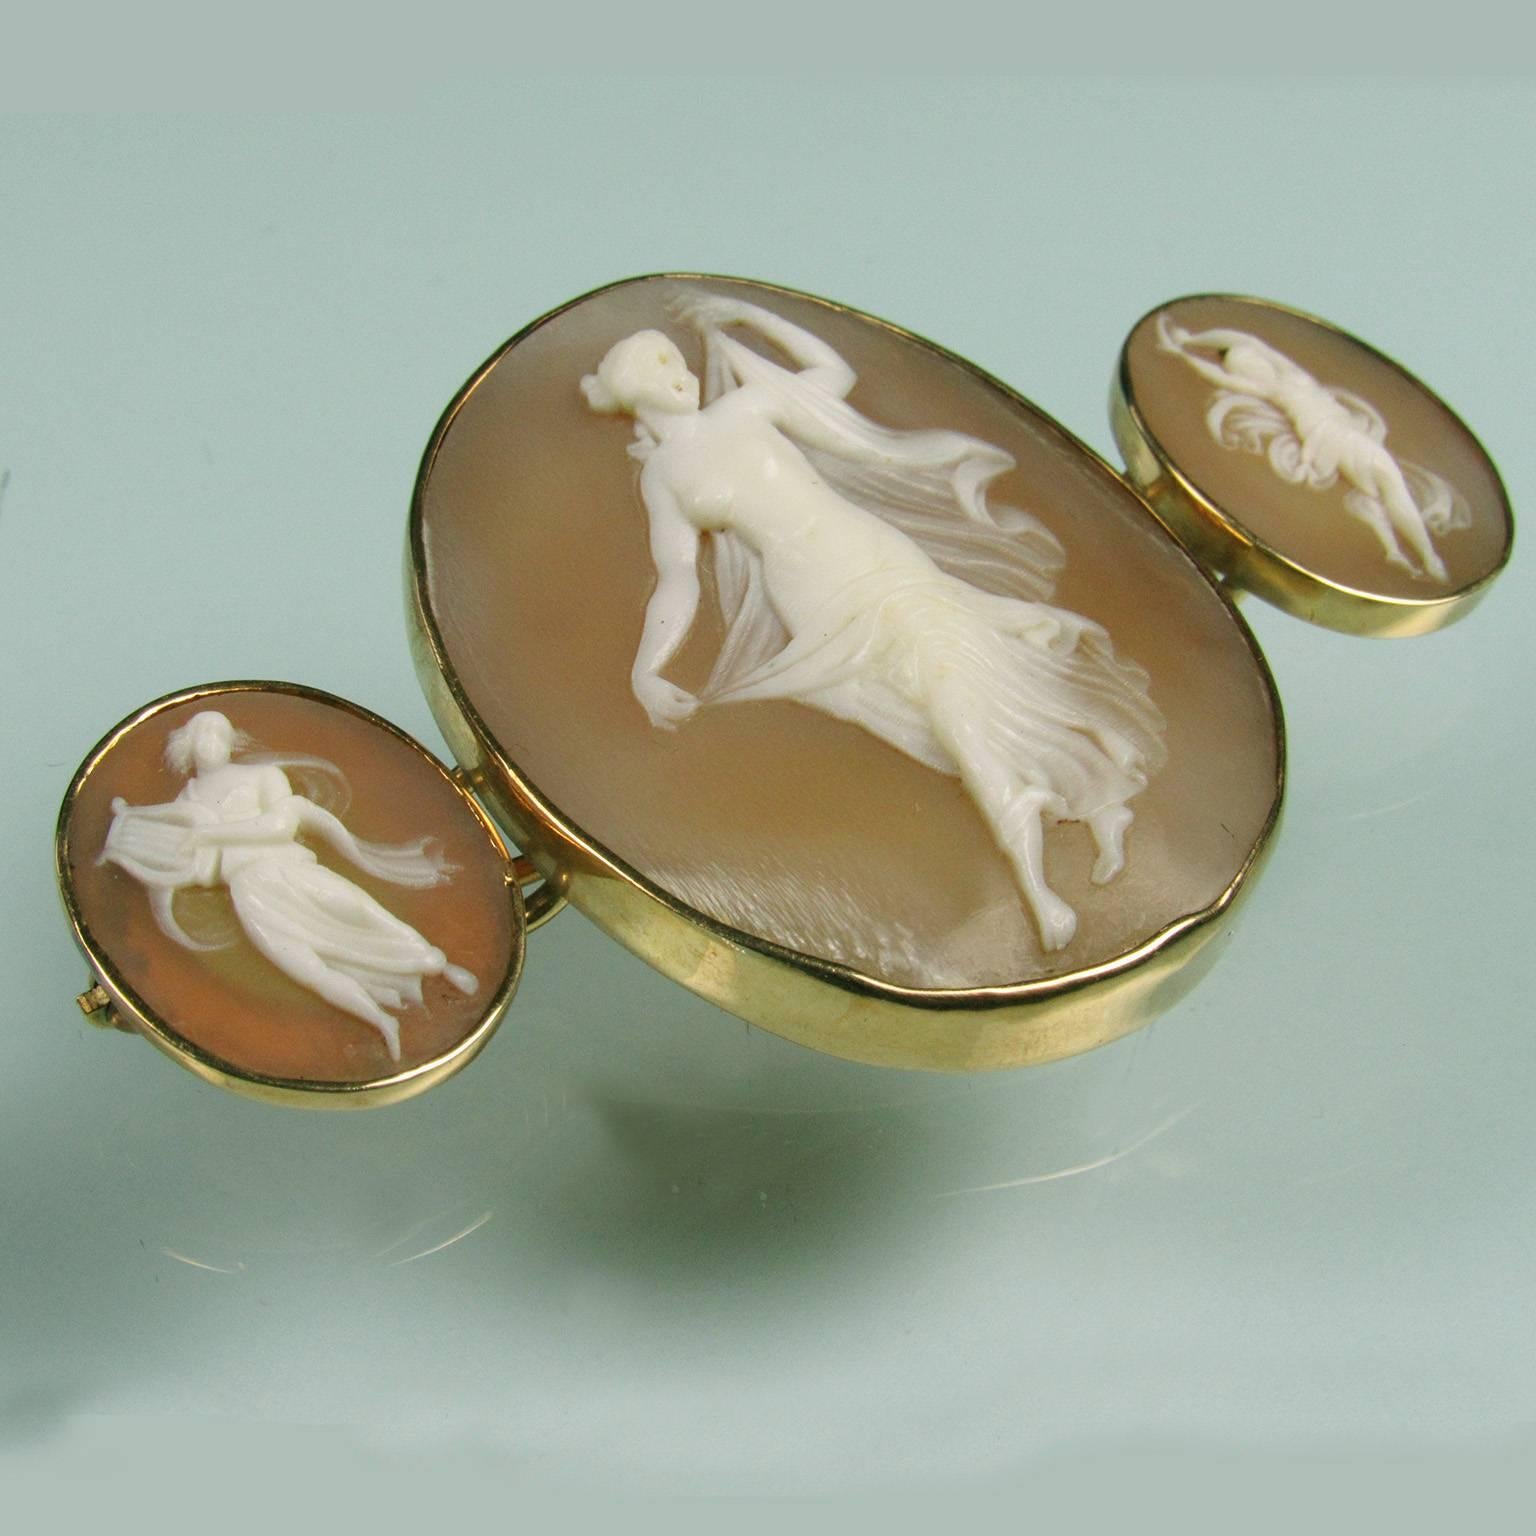 Exceptional Victorian 14kt Yellow Gold Triple Shell Carved Cameo Brooch.  Central cameo depicting a full female figure with flowing garment, flanked by two smaller cameos depicting female musicians.   Signed on verso illegibly and clasp marked